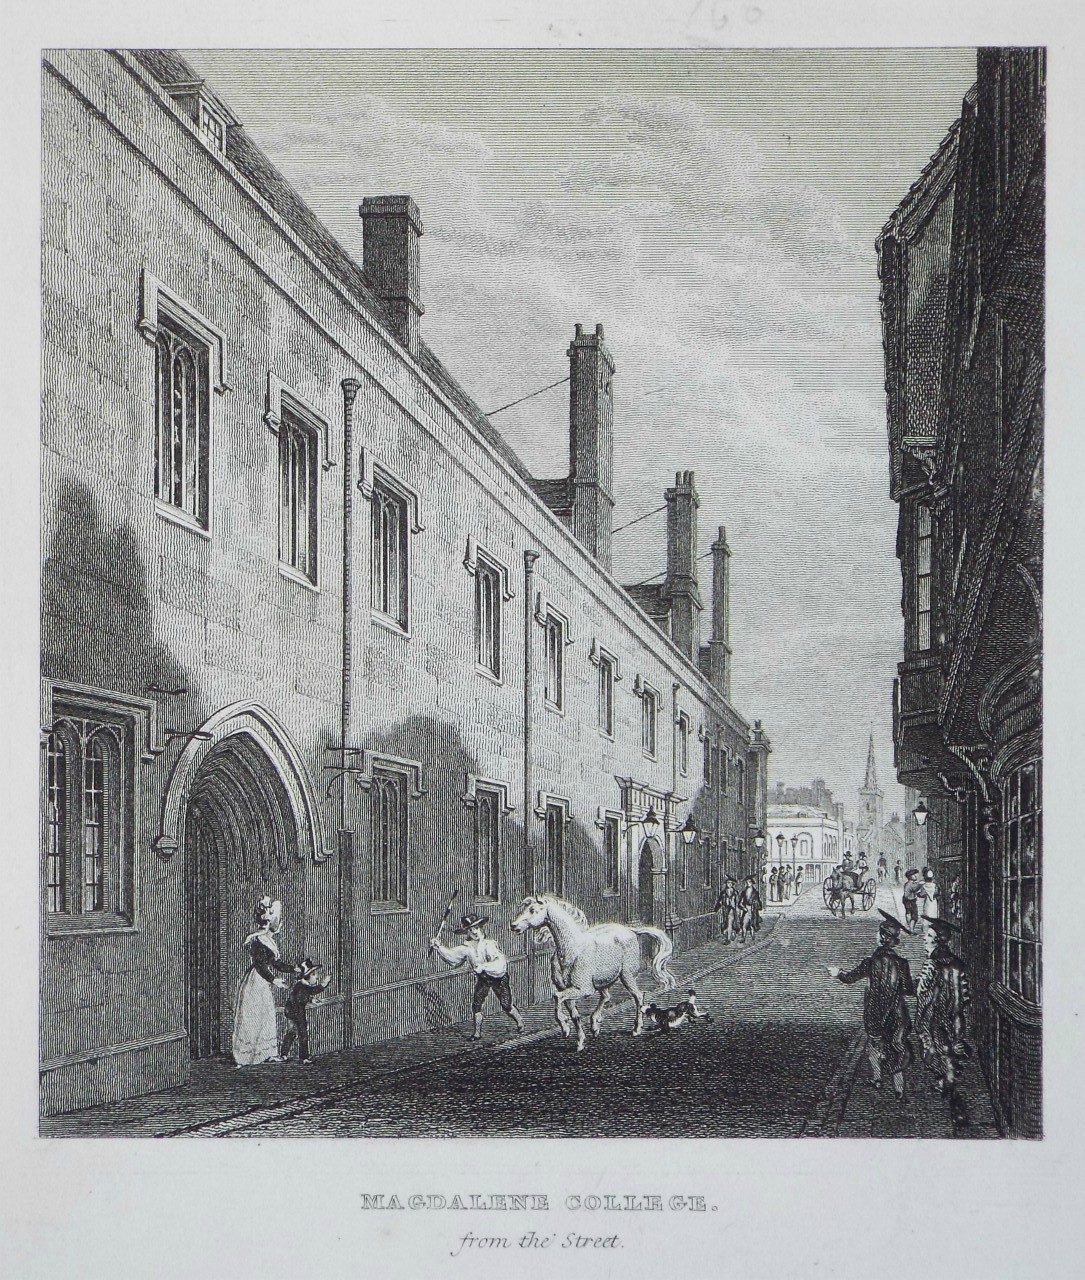 Print - Magdalene College. from the Street.